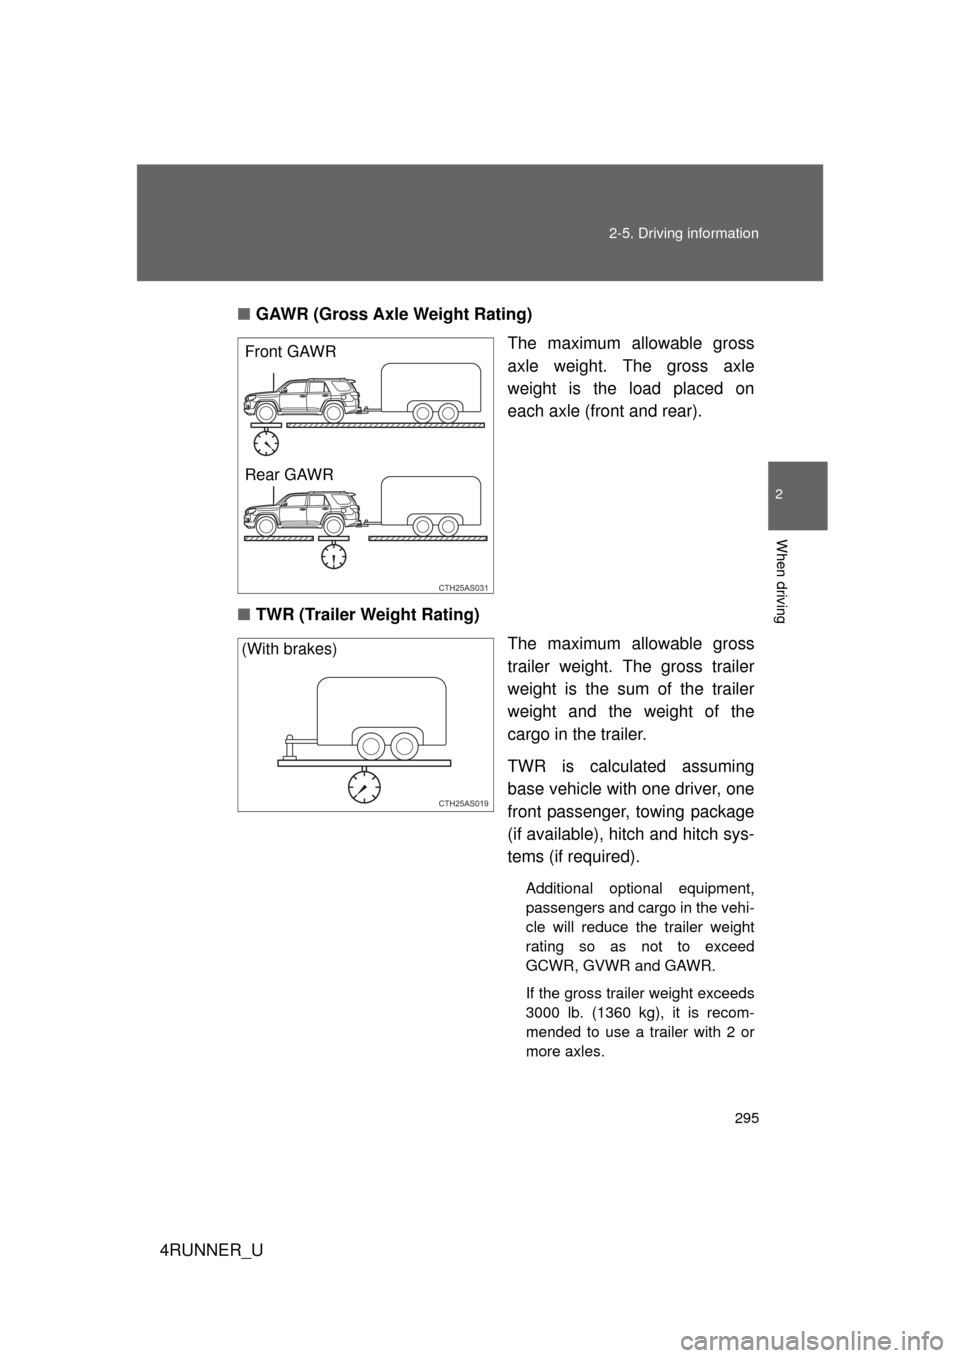 TOYOTA 4RUNNER 2012 N280 / 5.G Owners Manual 295
2-5. Driving information
2
When driving
4RUNNER_U
■
GAWR (Gross Axle Weight Rating)
The maximum allowable gross
axle weight. The gross axle
weight is the load placed on
each axle (front and rear